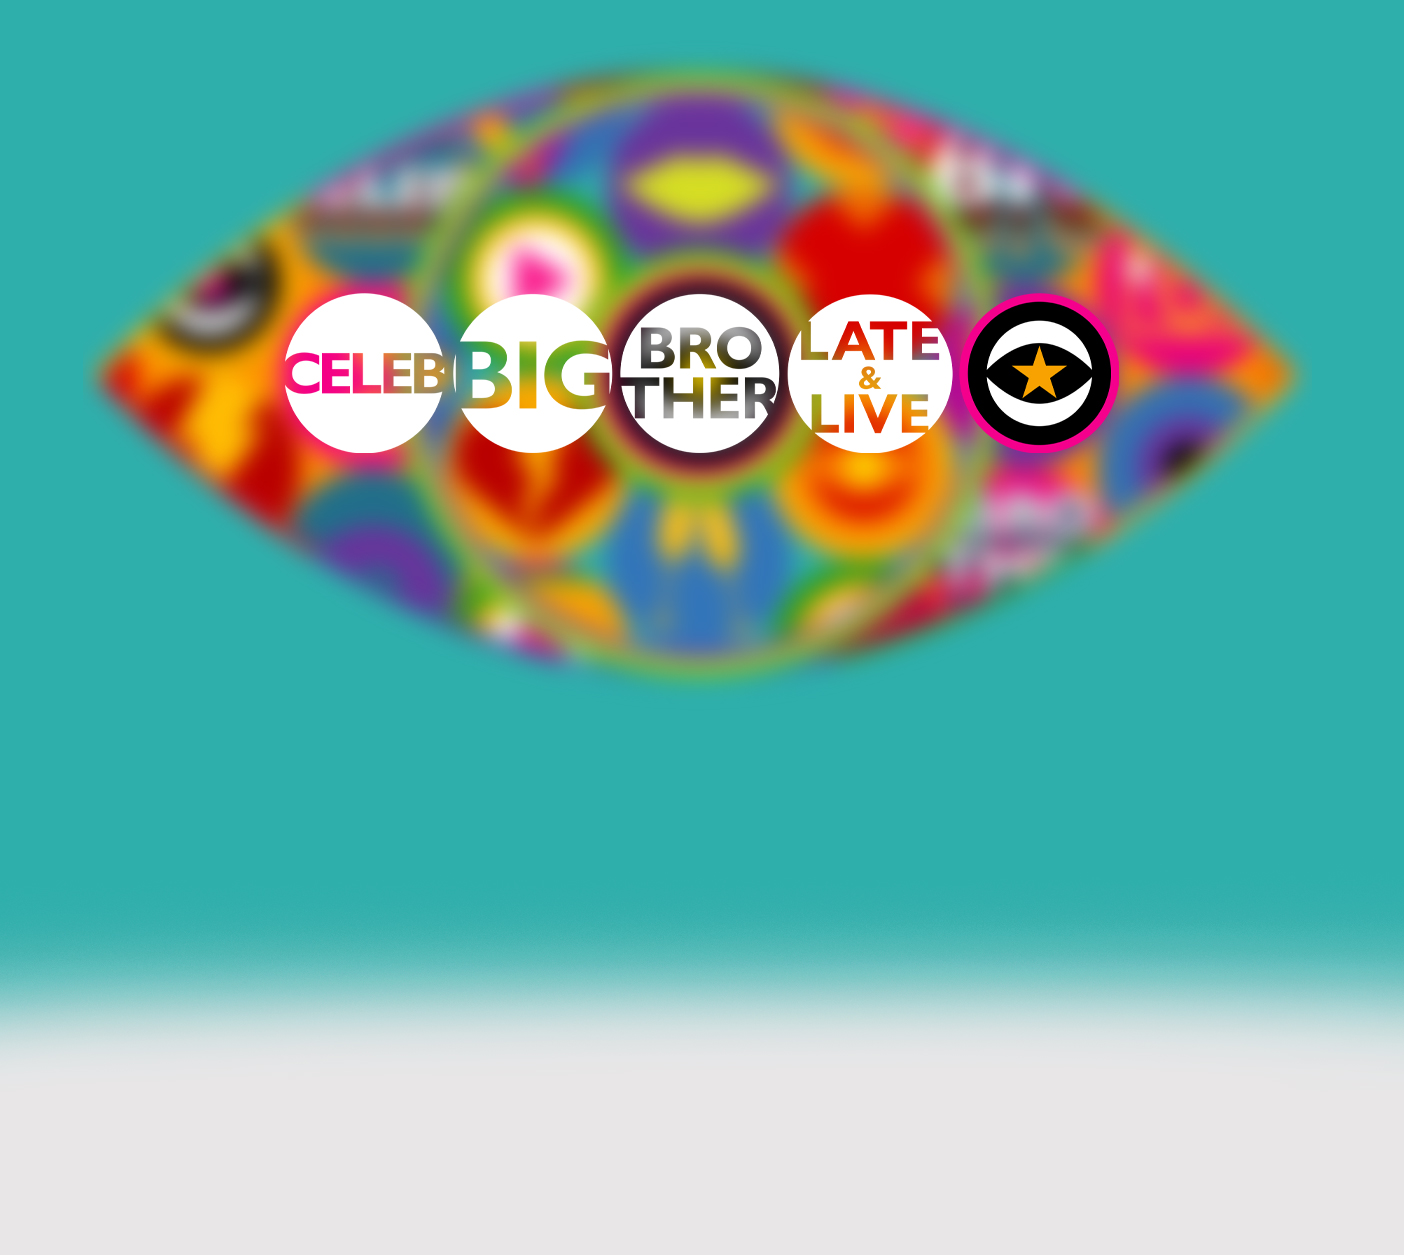 Book Tickets For Celebrity Big Brother Late And Live Applausestore